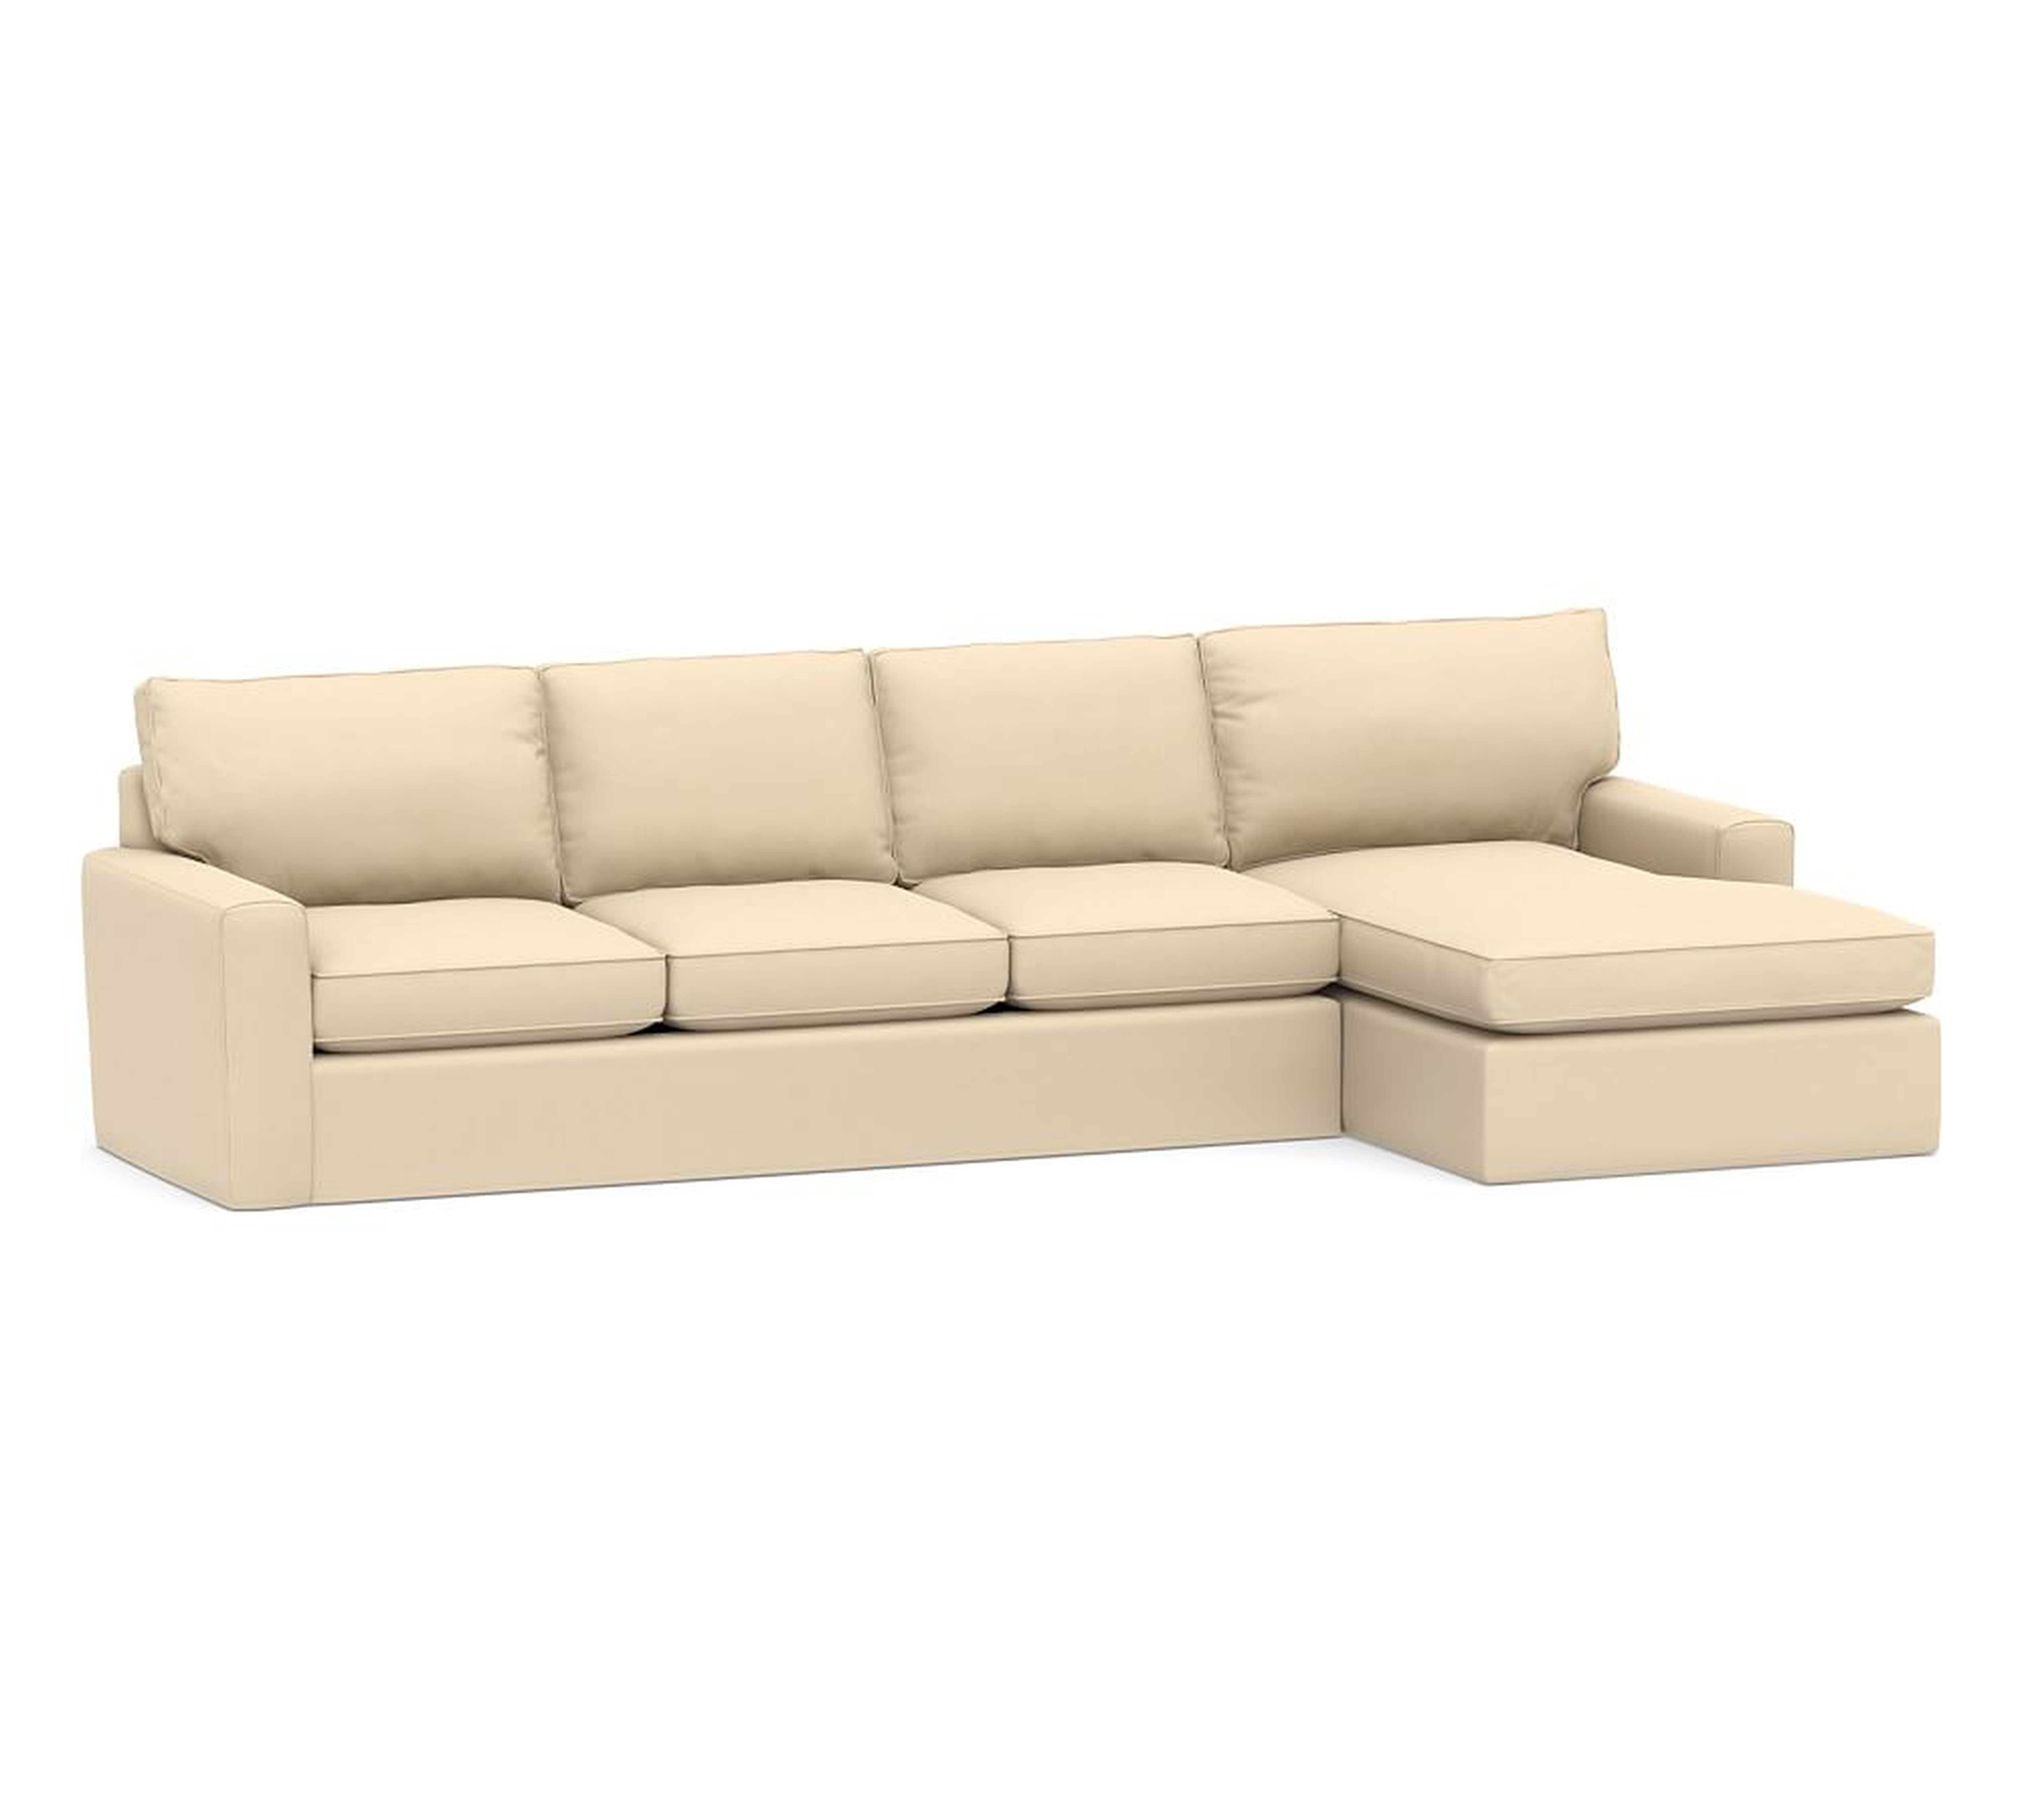 Pearce Square Arm Slipcovered Left Arm Sofa With Double Wide Chaise Sectional, Down Blend Wrapped Cushions, Performance Everydayvelvet™ Buckwheat - Pottery Barn